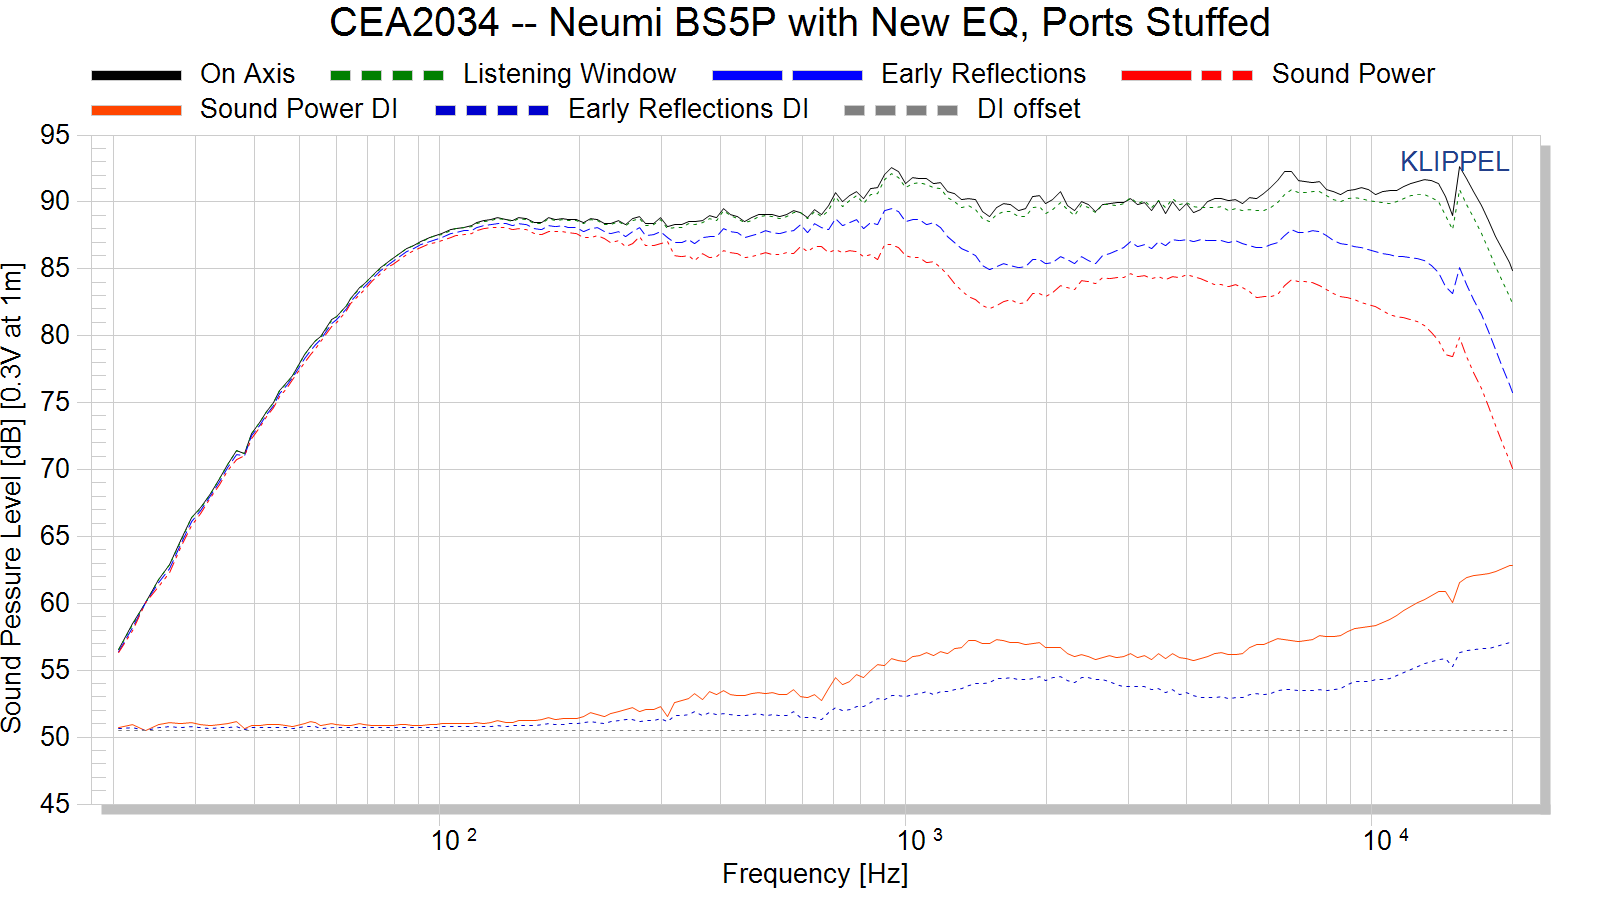 CEA2034%20--%20Neumi%20BS5P%20with%20New%20EQ%2C%20Ports%20Stuffed.png